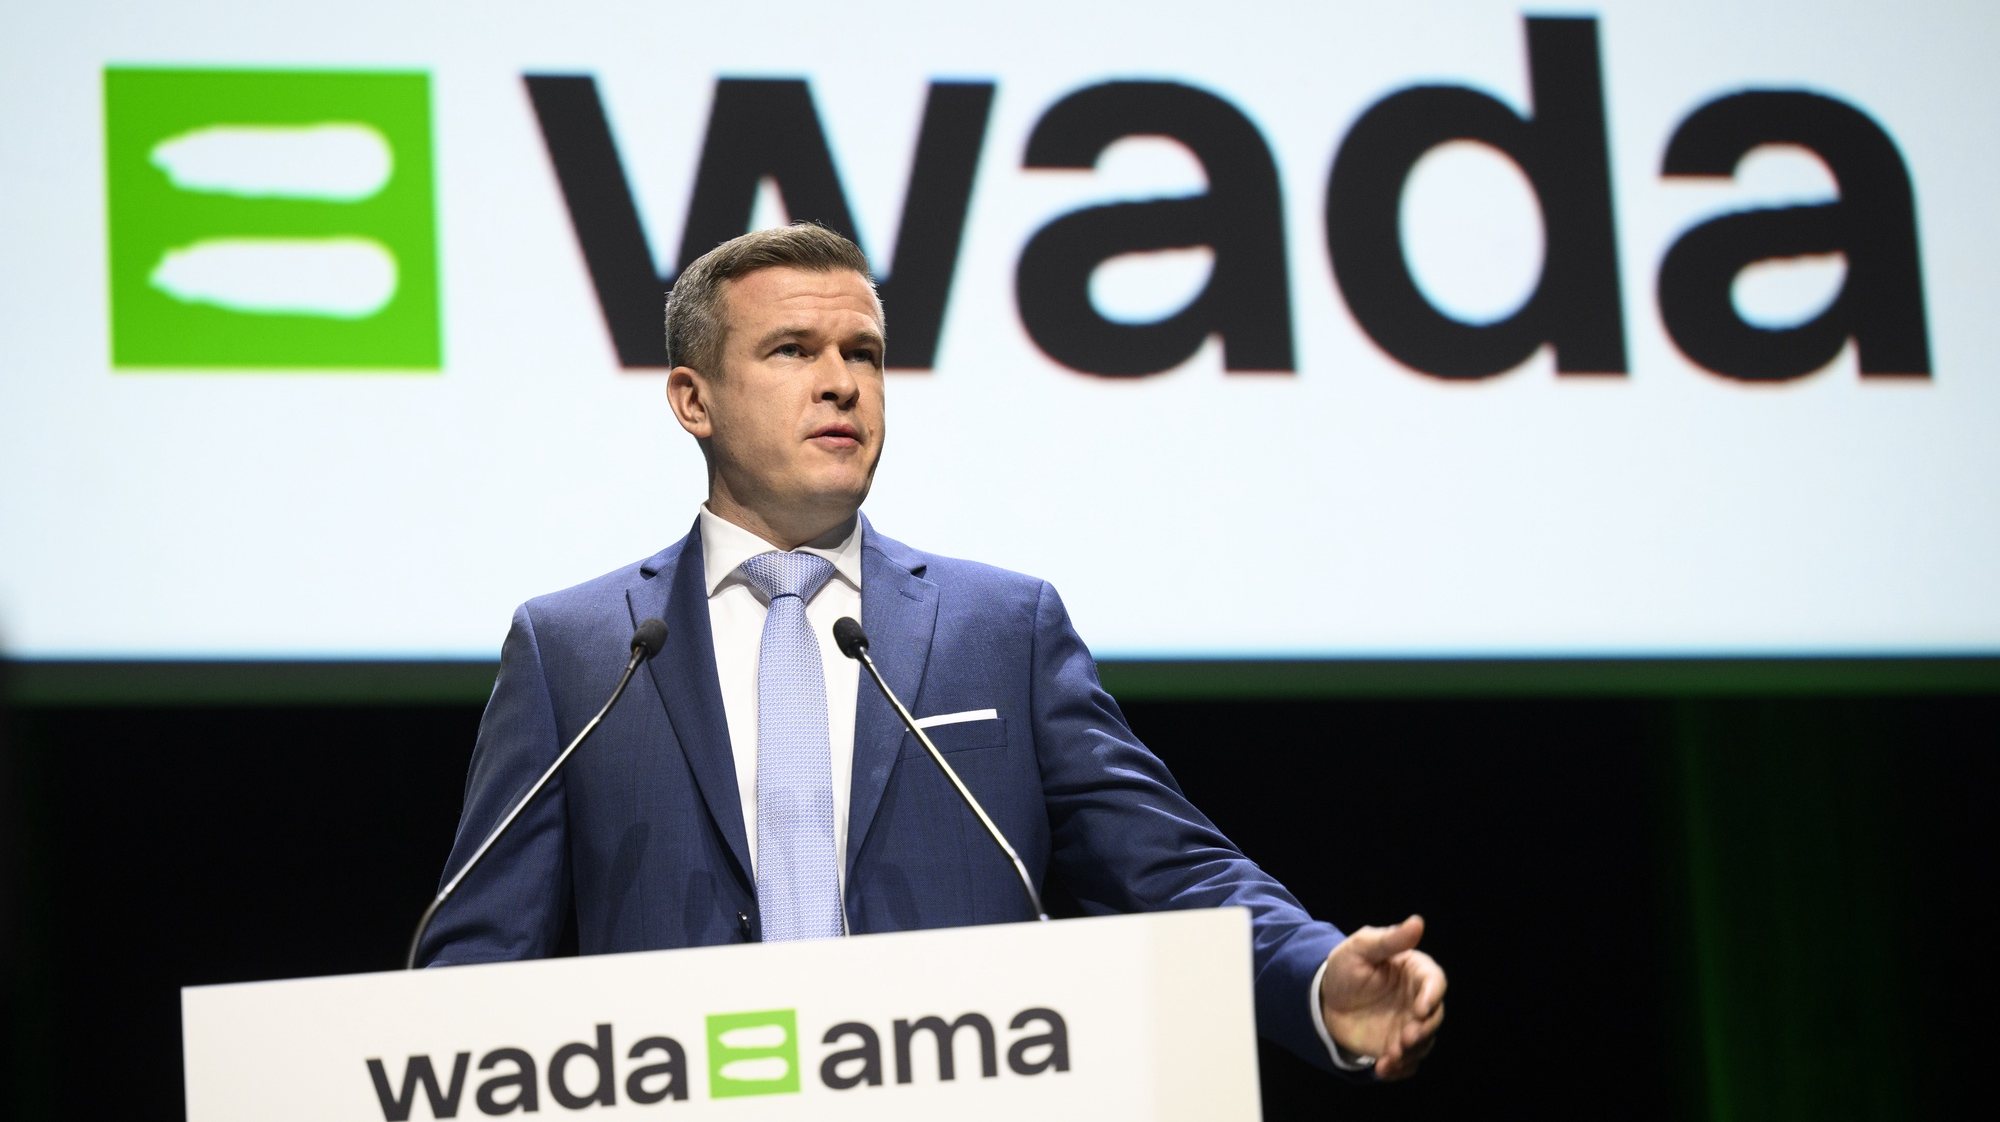 epa10521860 The President of the World Anti-Doping Agency (WADA), Witold Banka, of Poland speaks during the opening of the WADA Symposium for Anti-Doping Organizations at the SwissTech Convention Center in Lausanne, Switzerland, 14 March 2023.  EPA/LAURENT GILLIERON